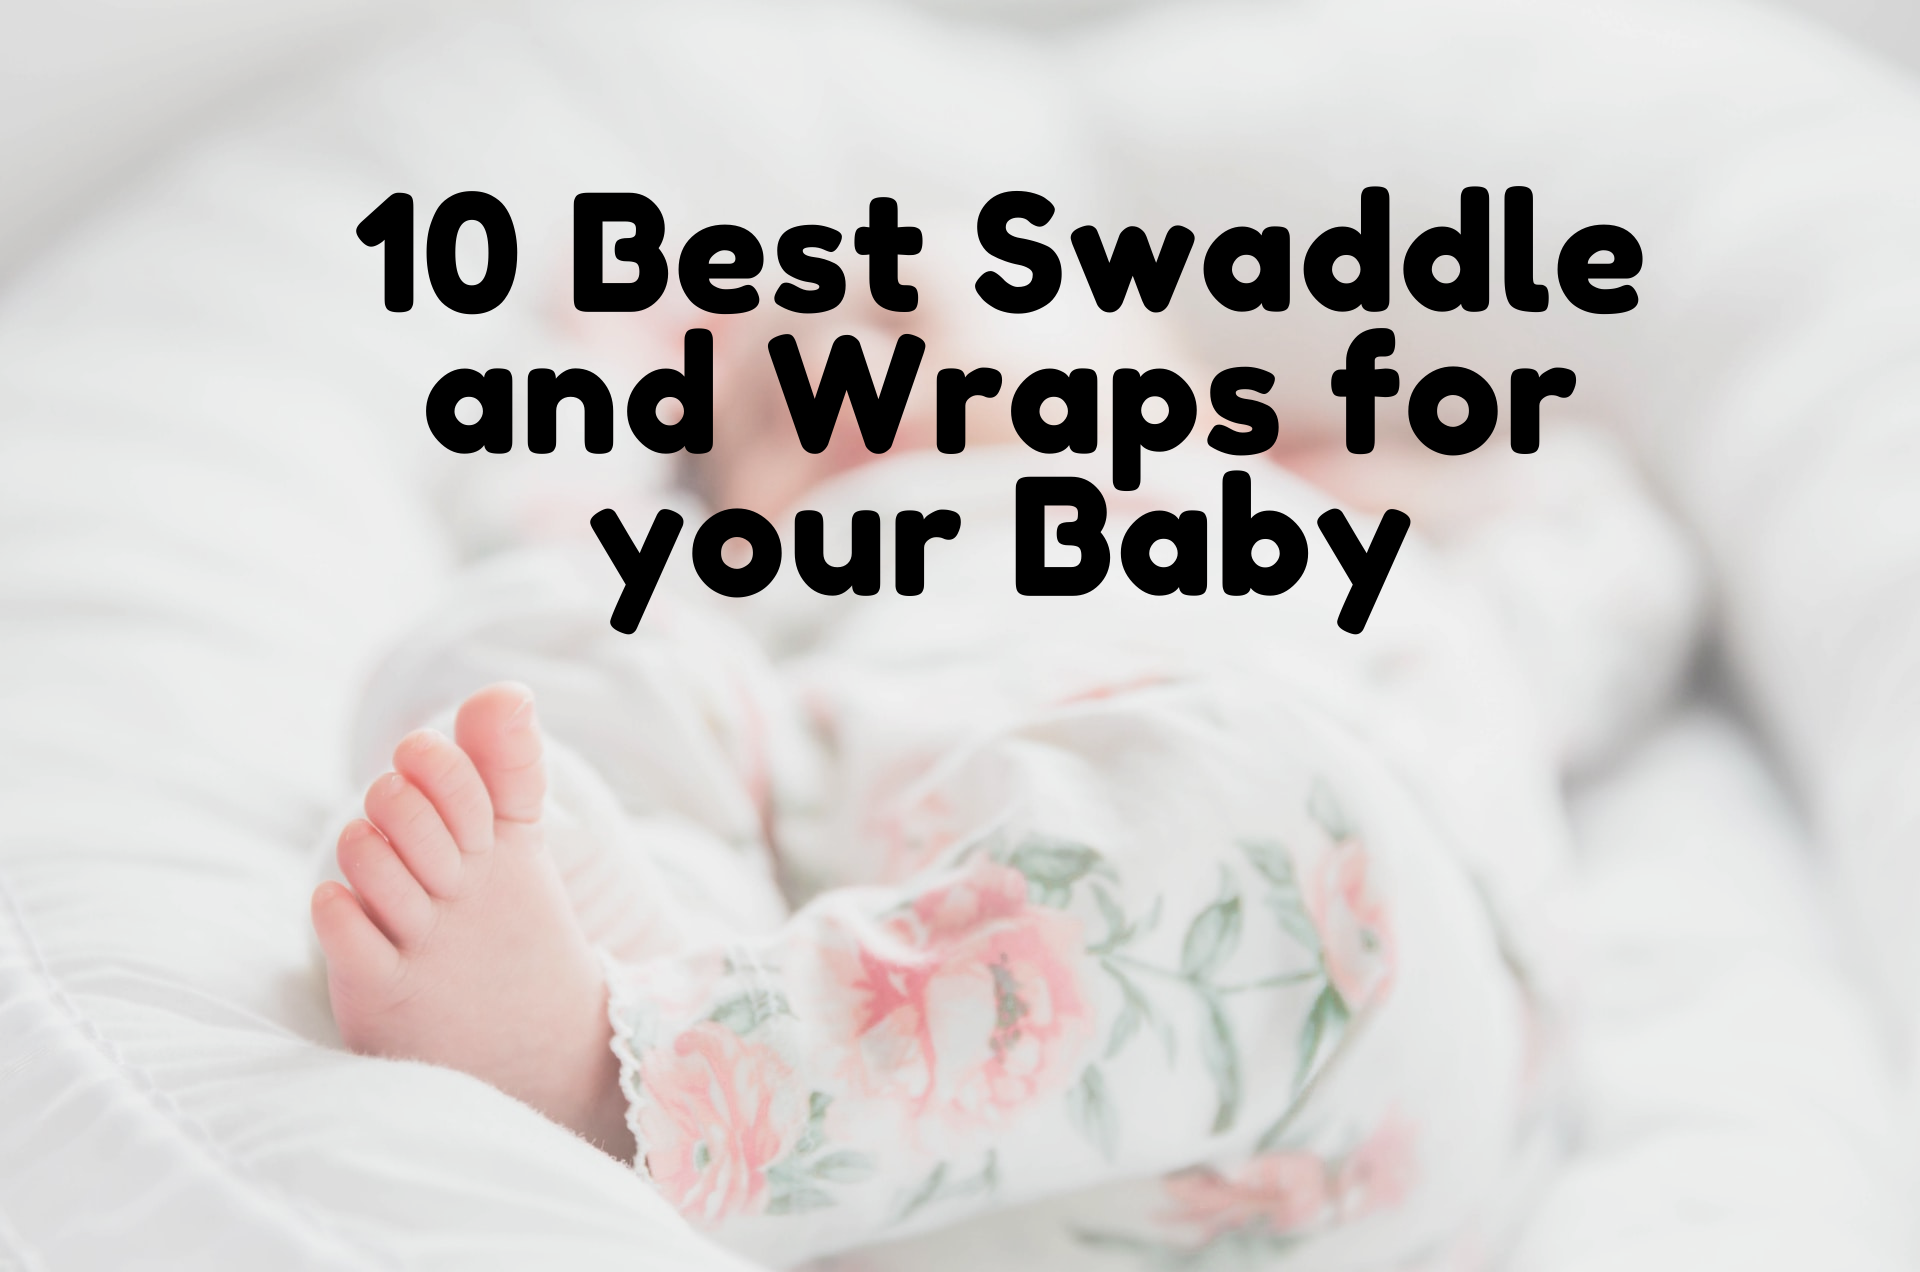 10 Best Swaddle and Wraps for your Baby